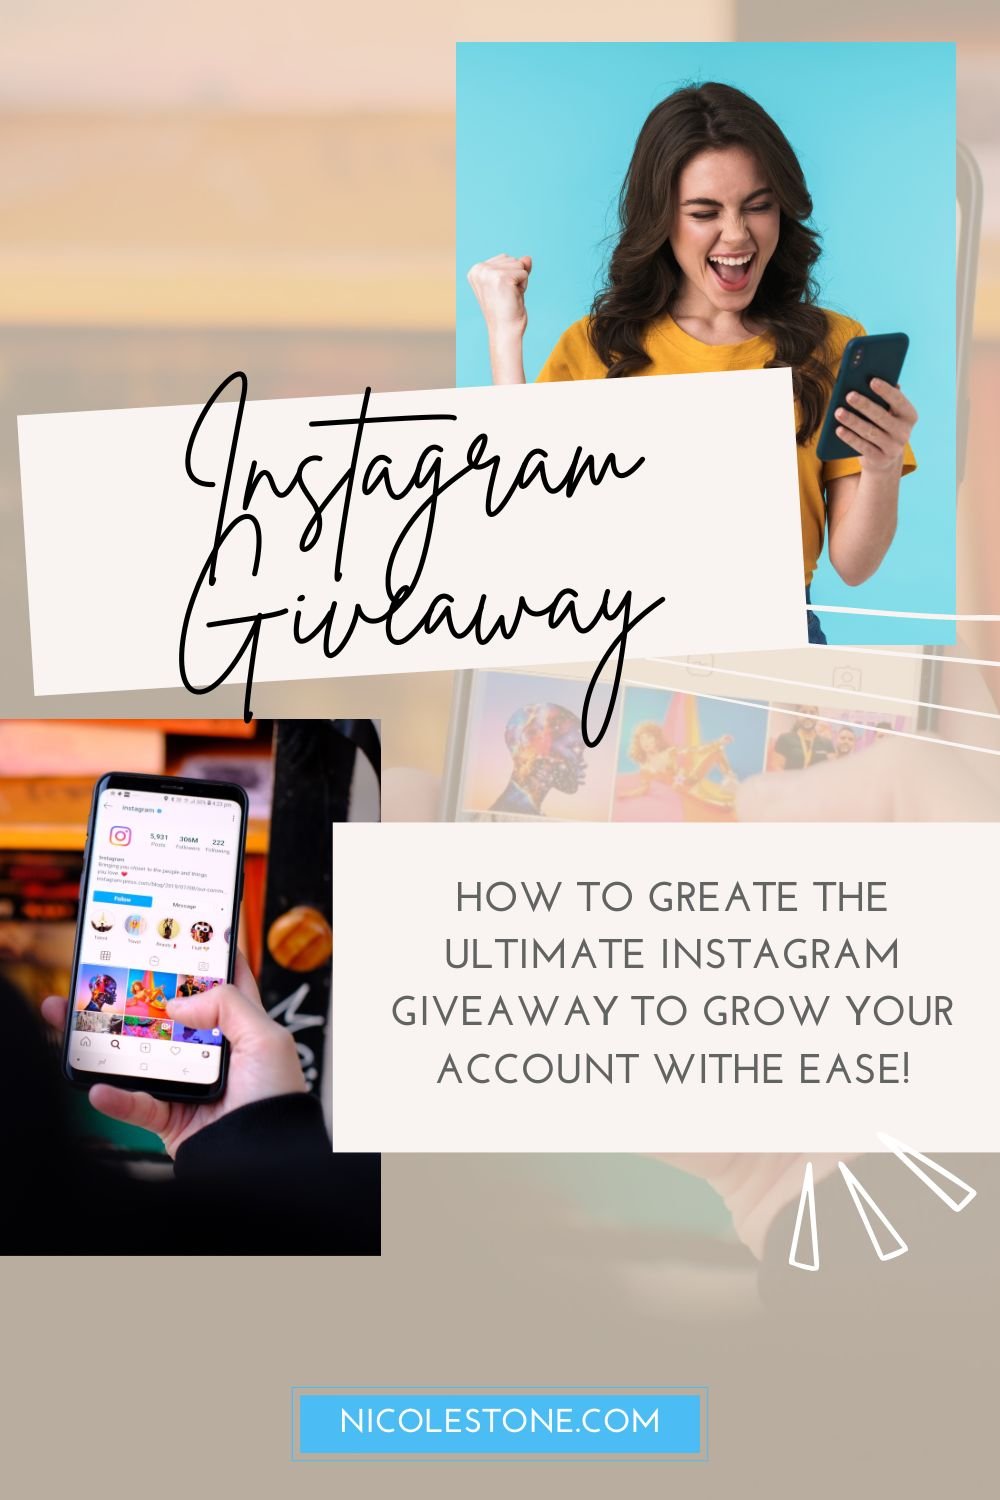 Giveaway App Template